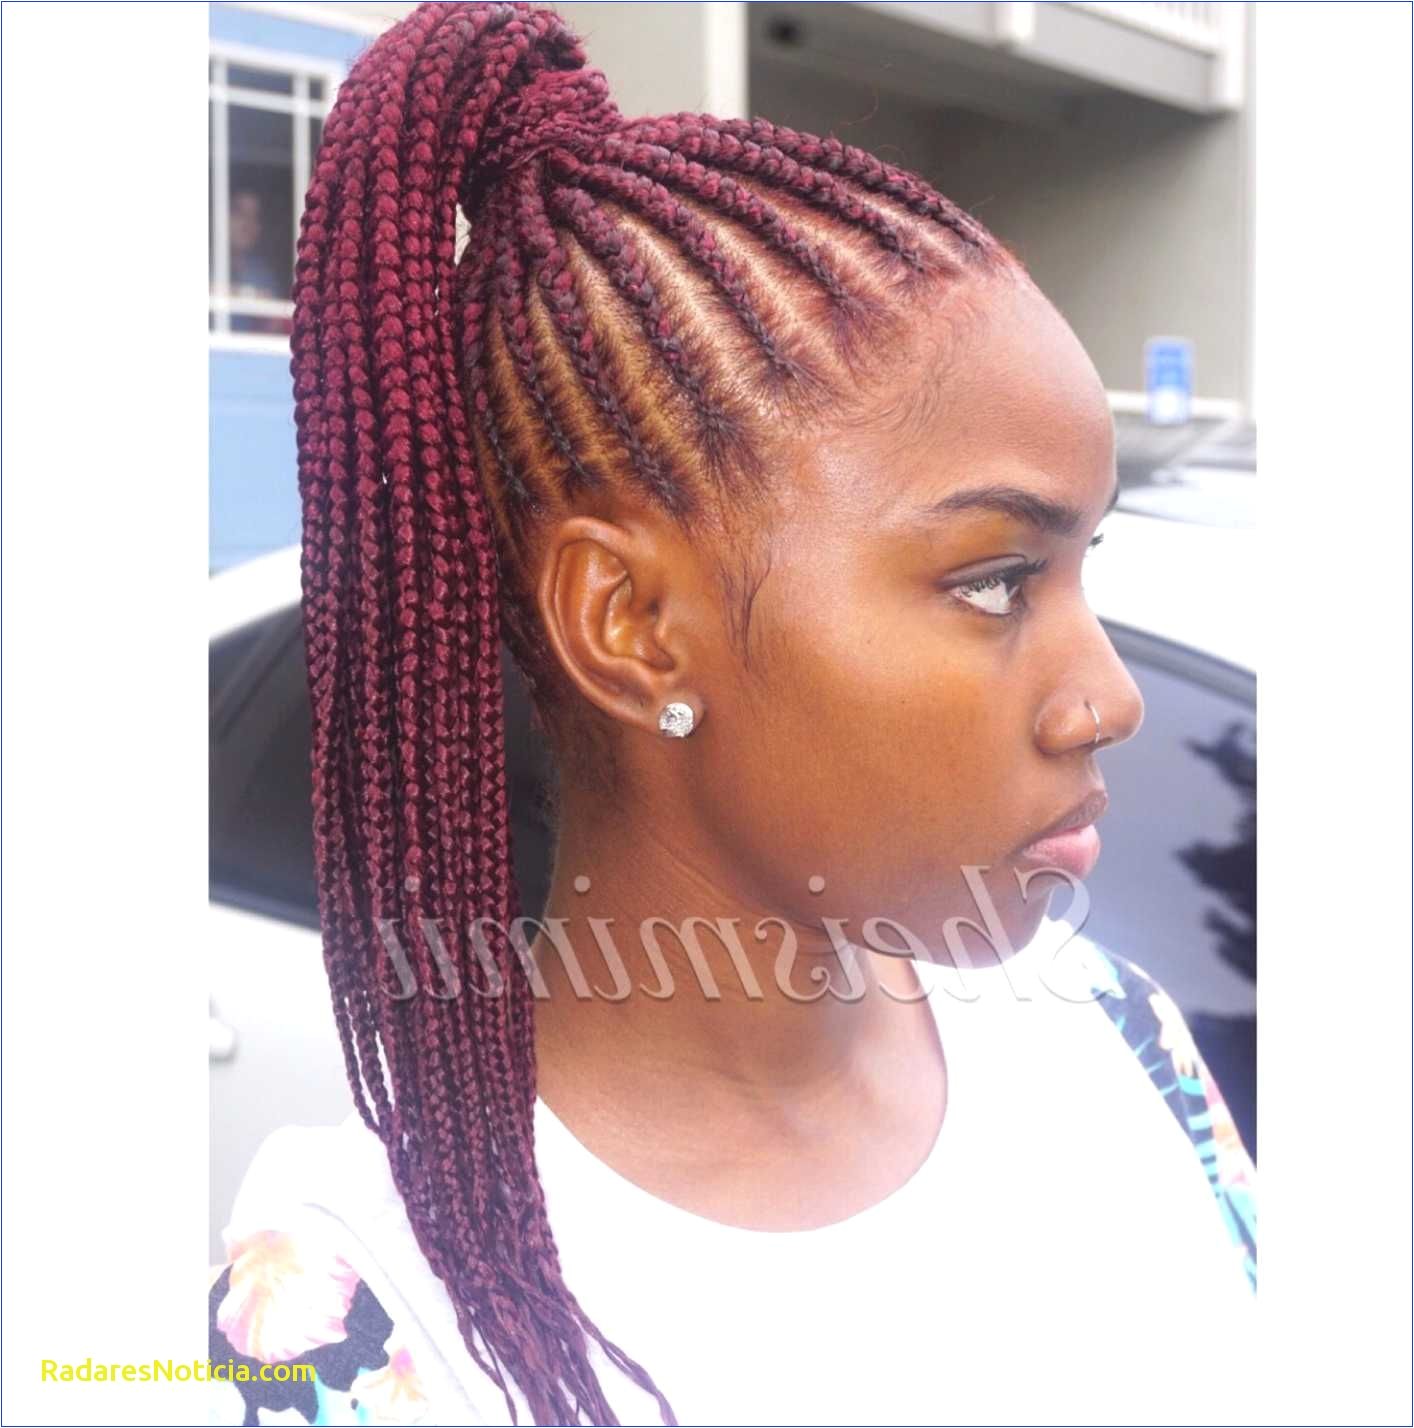 9 List Braided Down Hairstyles Hairstyles with Braids Best Big Braids Hairstyles Fresh Micro Hairstyles 0d Regrowhairproducts